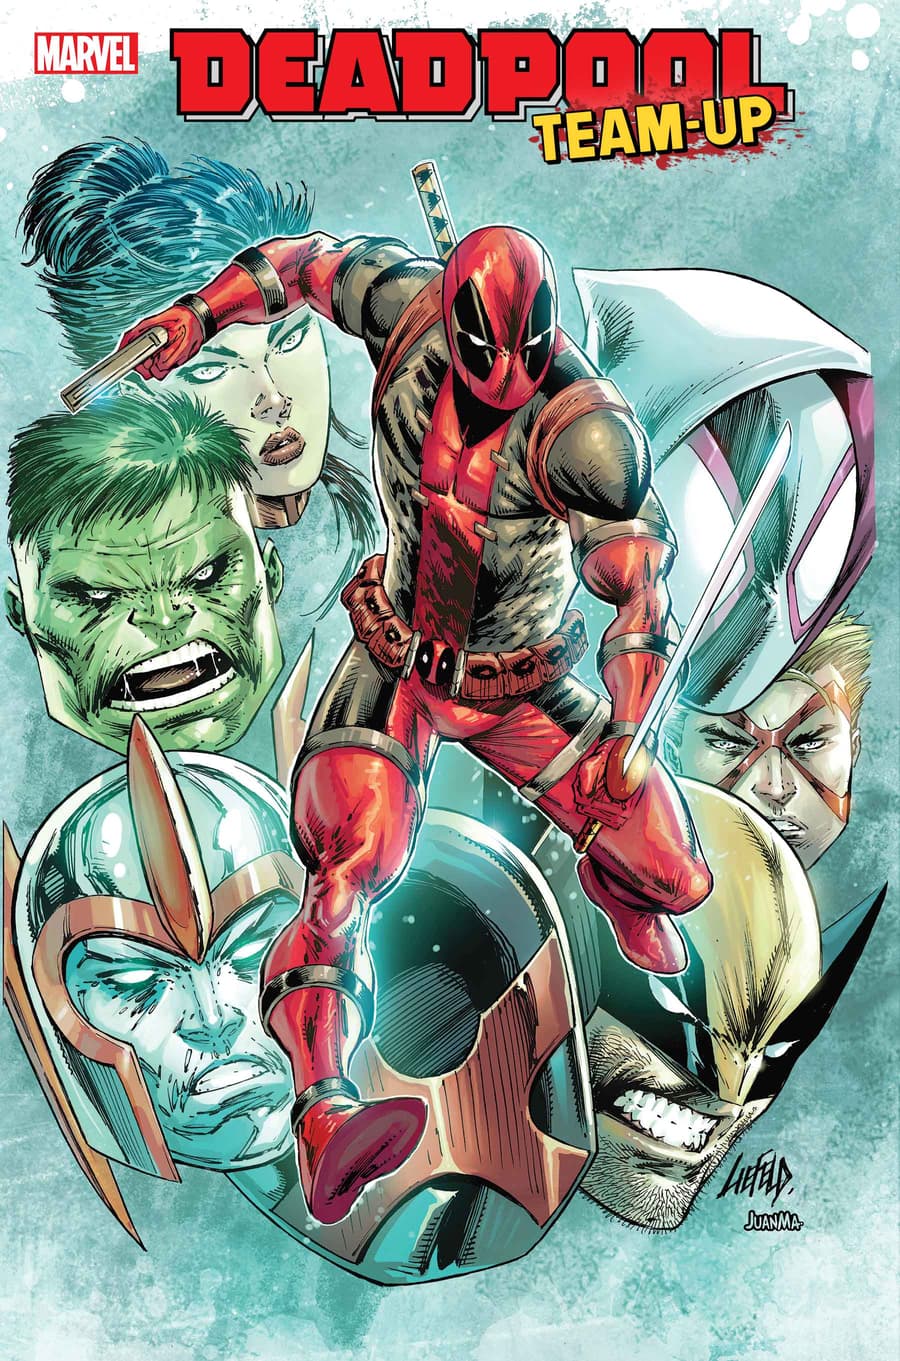 DEADPOOL TEAM-UP #1 Foil Variant Cover by Rob Liefeld